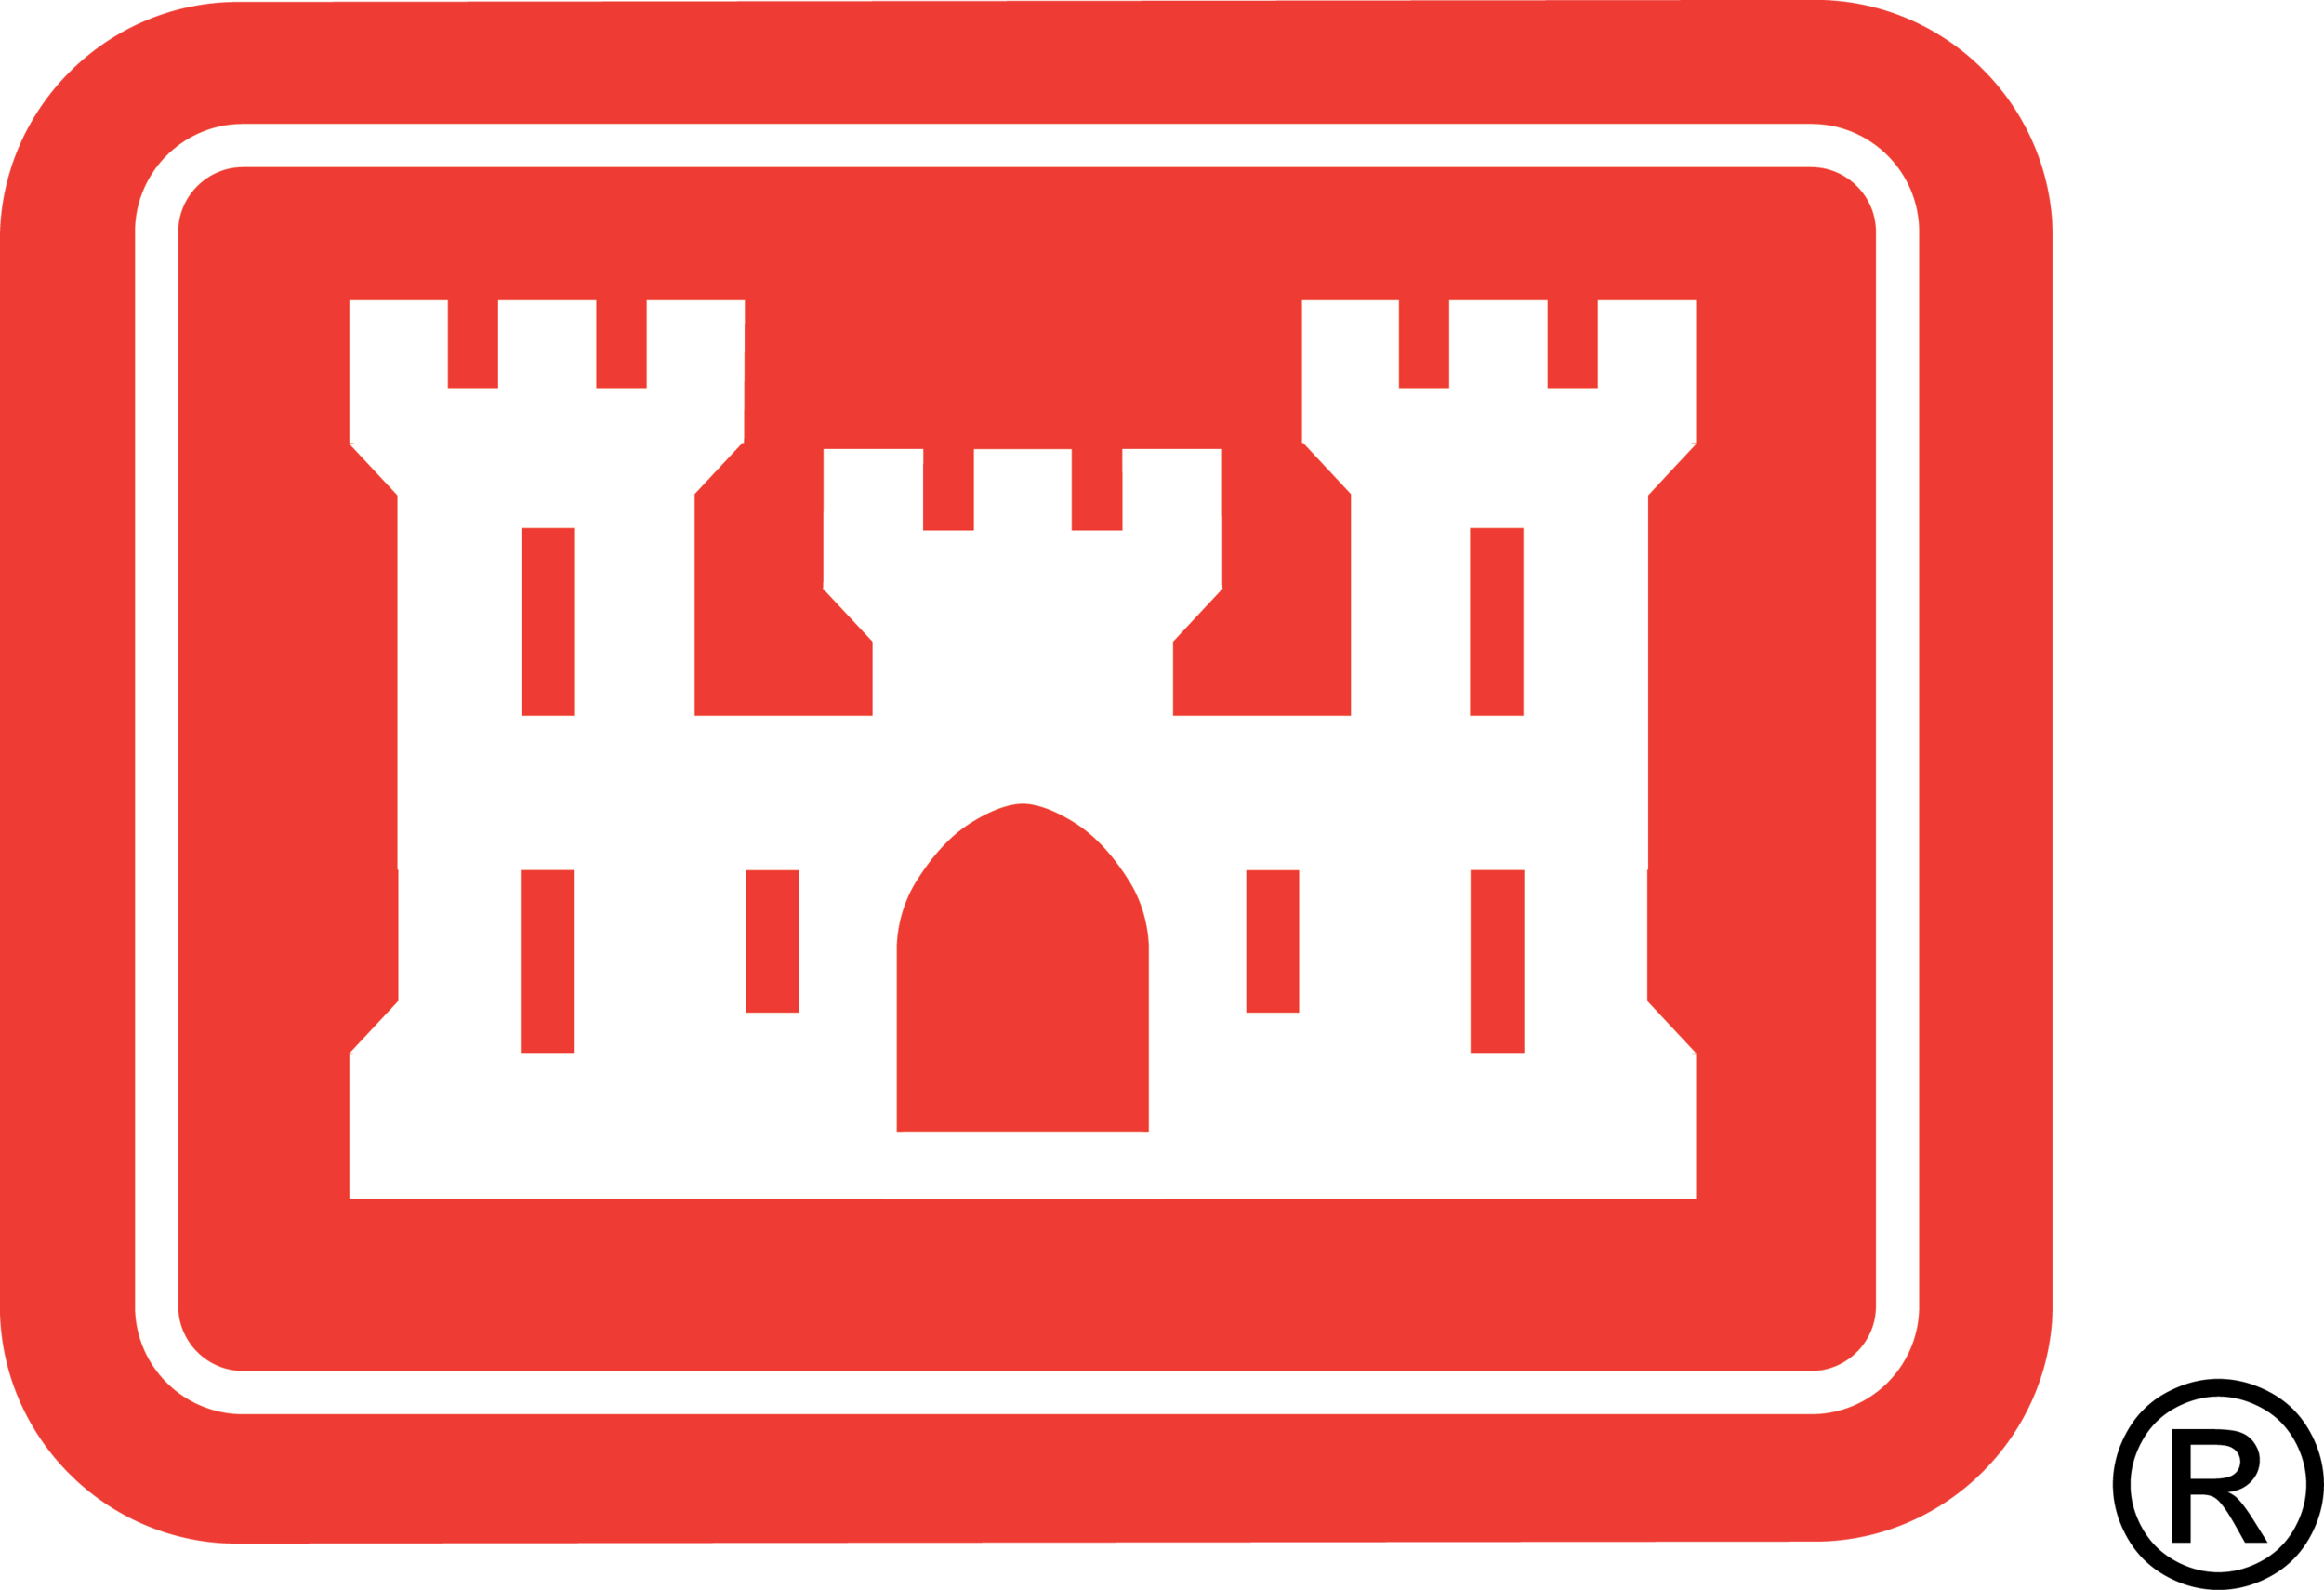 USACE_general logo replaced 040421.png